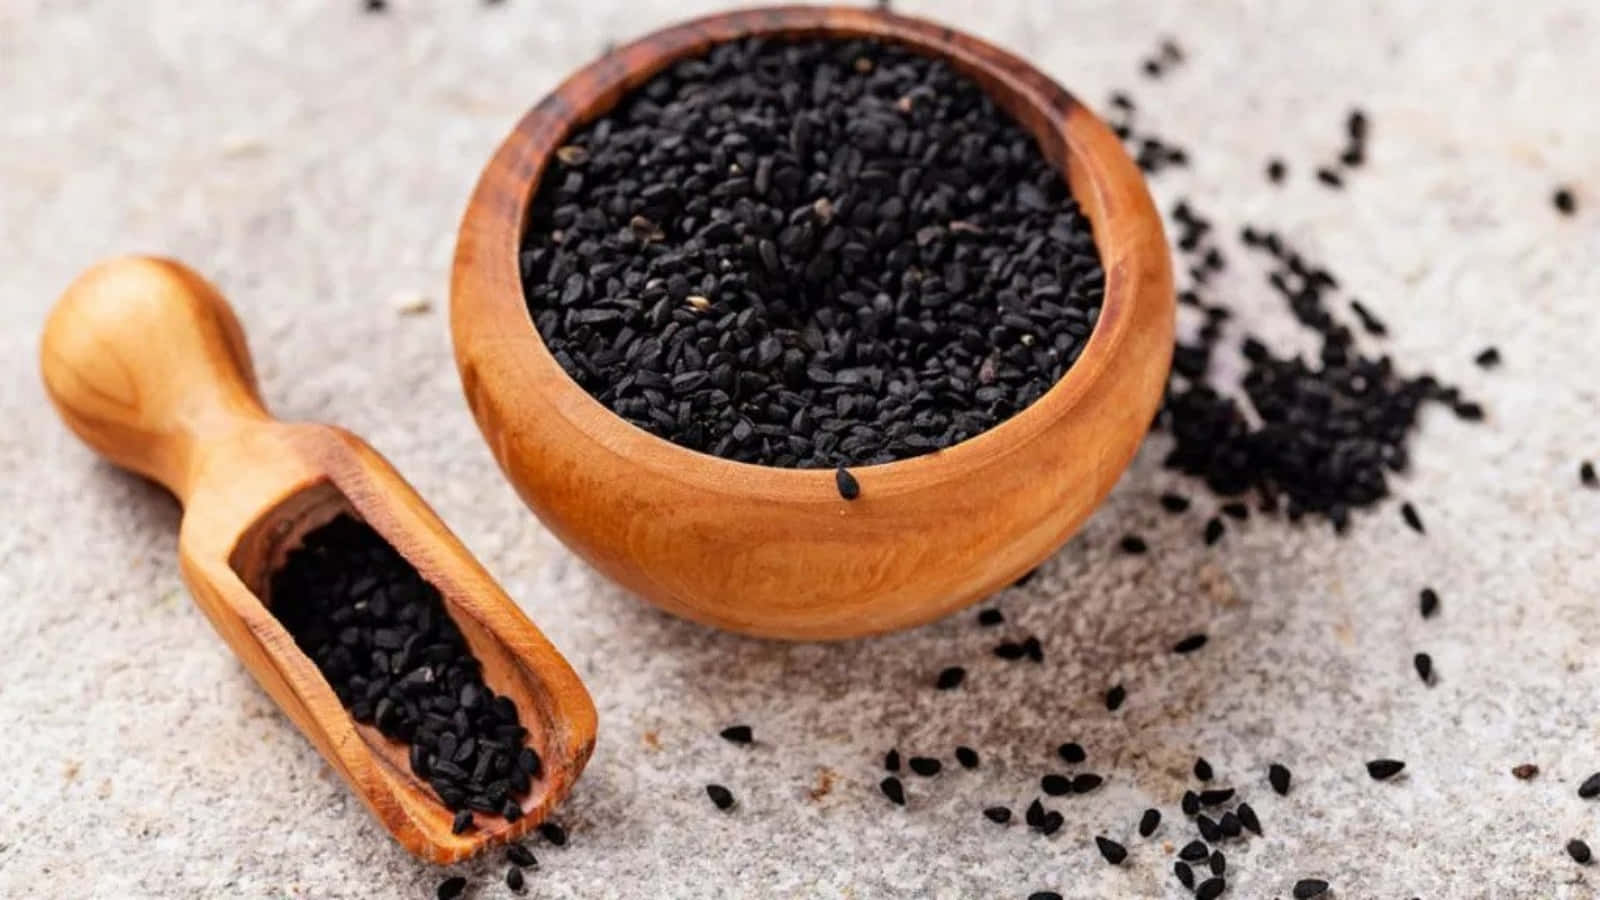 Nutritious black sesame is an excellent source of antioxidants and minerals" Wallpaper